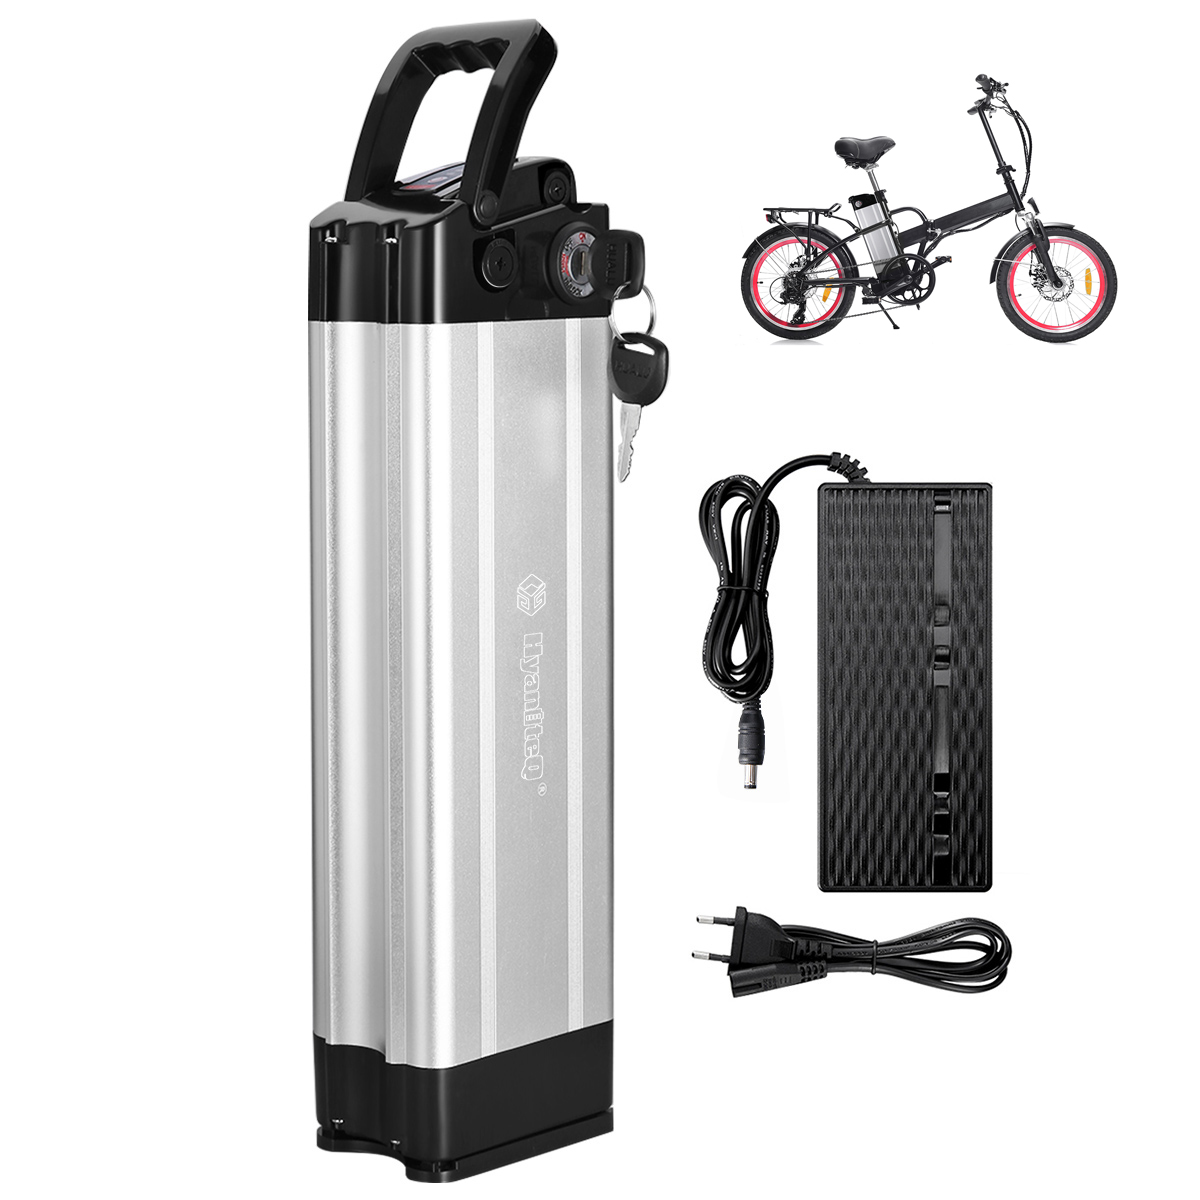 Find EU Direct HANIWINNER HA030 01 48V 12 5Ah 600W Electric Bike Battery Cells Pack E bikes Rechargeable Lithium Li ion Battery Charger for Mountain Bike City Bike eScooter for Sale on Gipsybee.com with cryptocurrencies